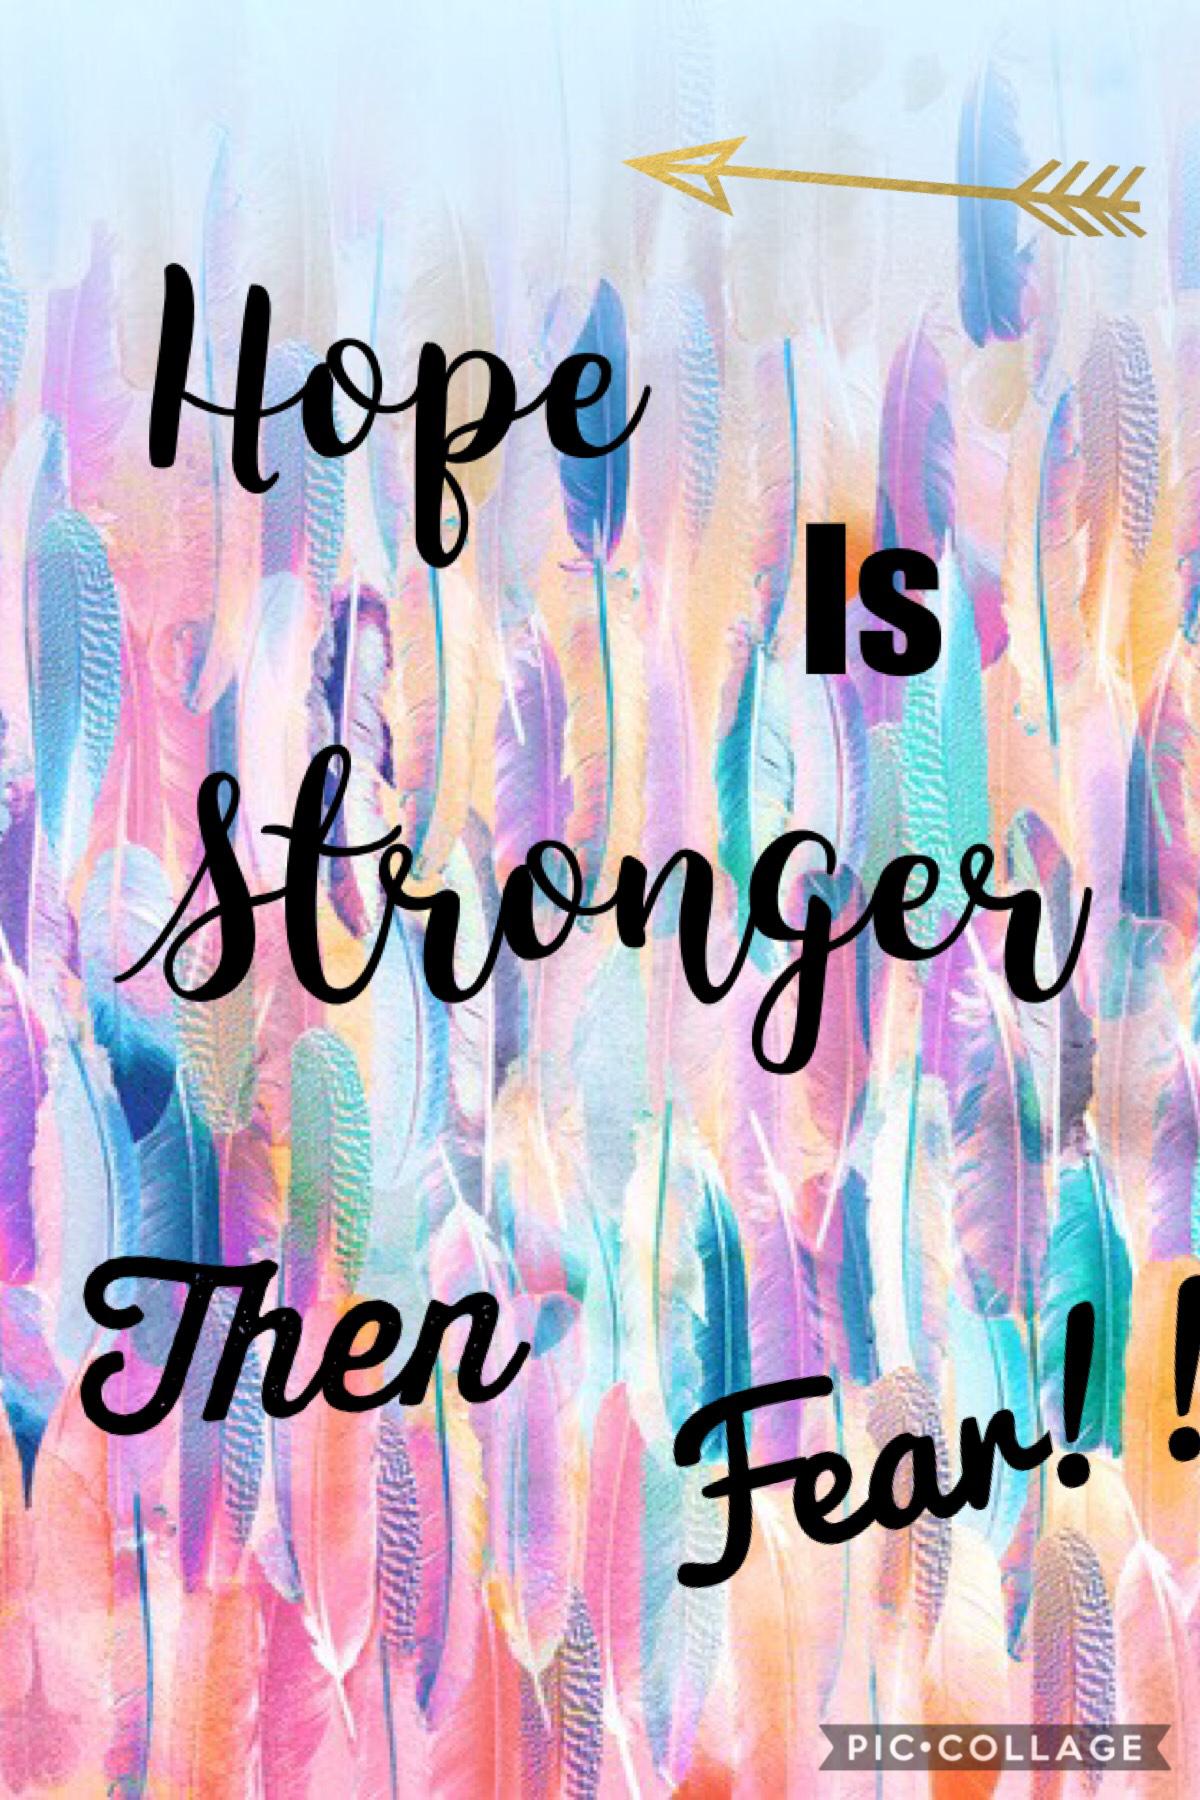 Hope is stronger then fear!